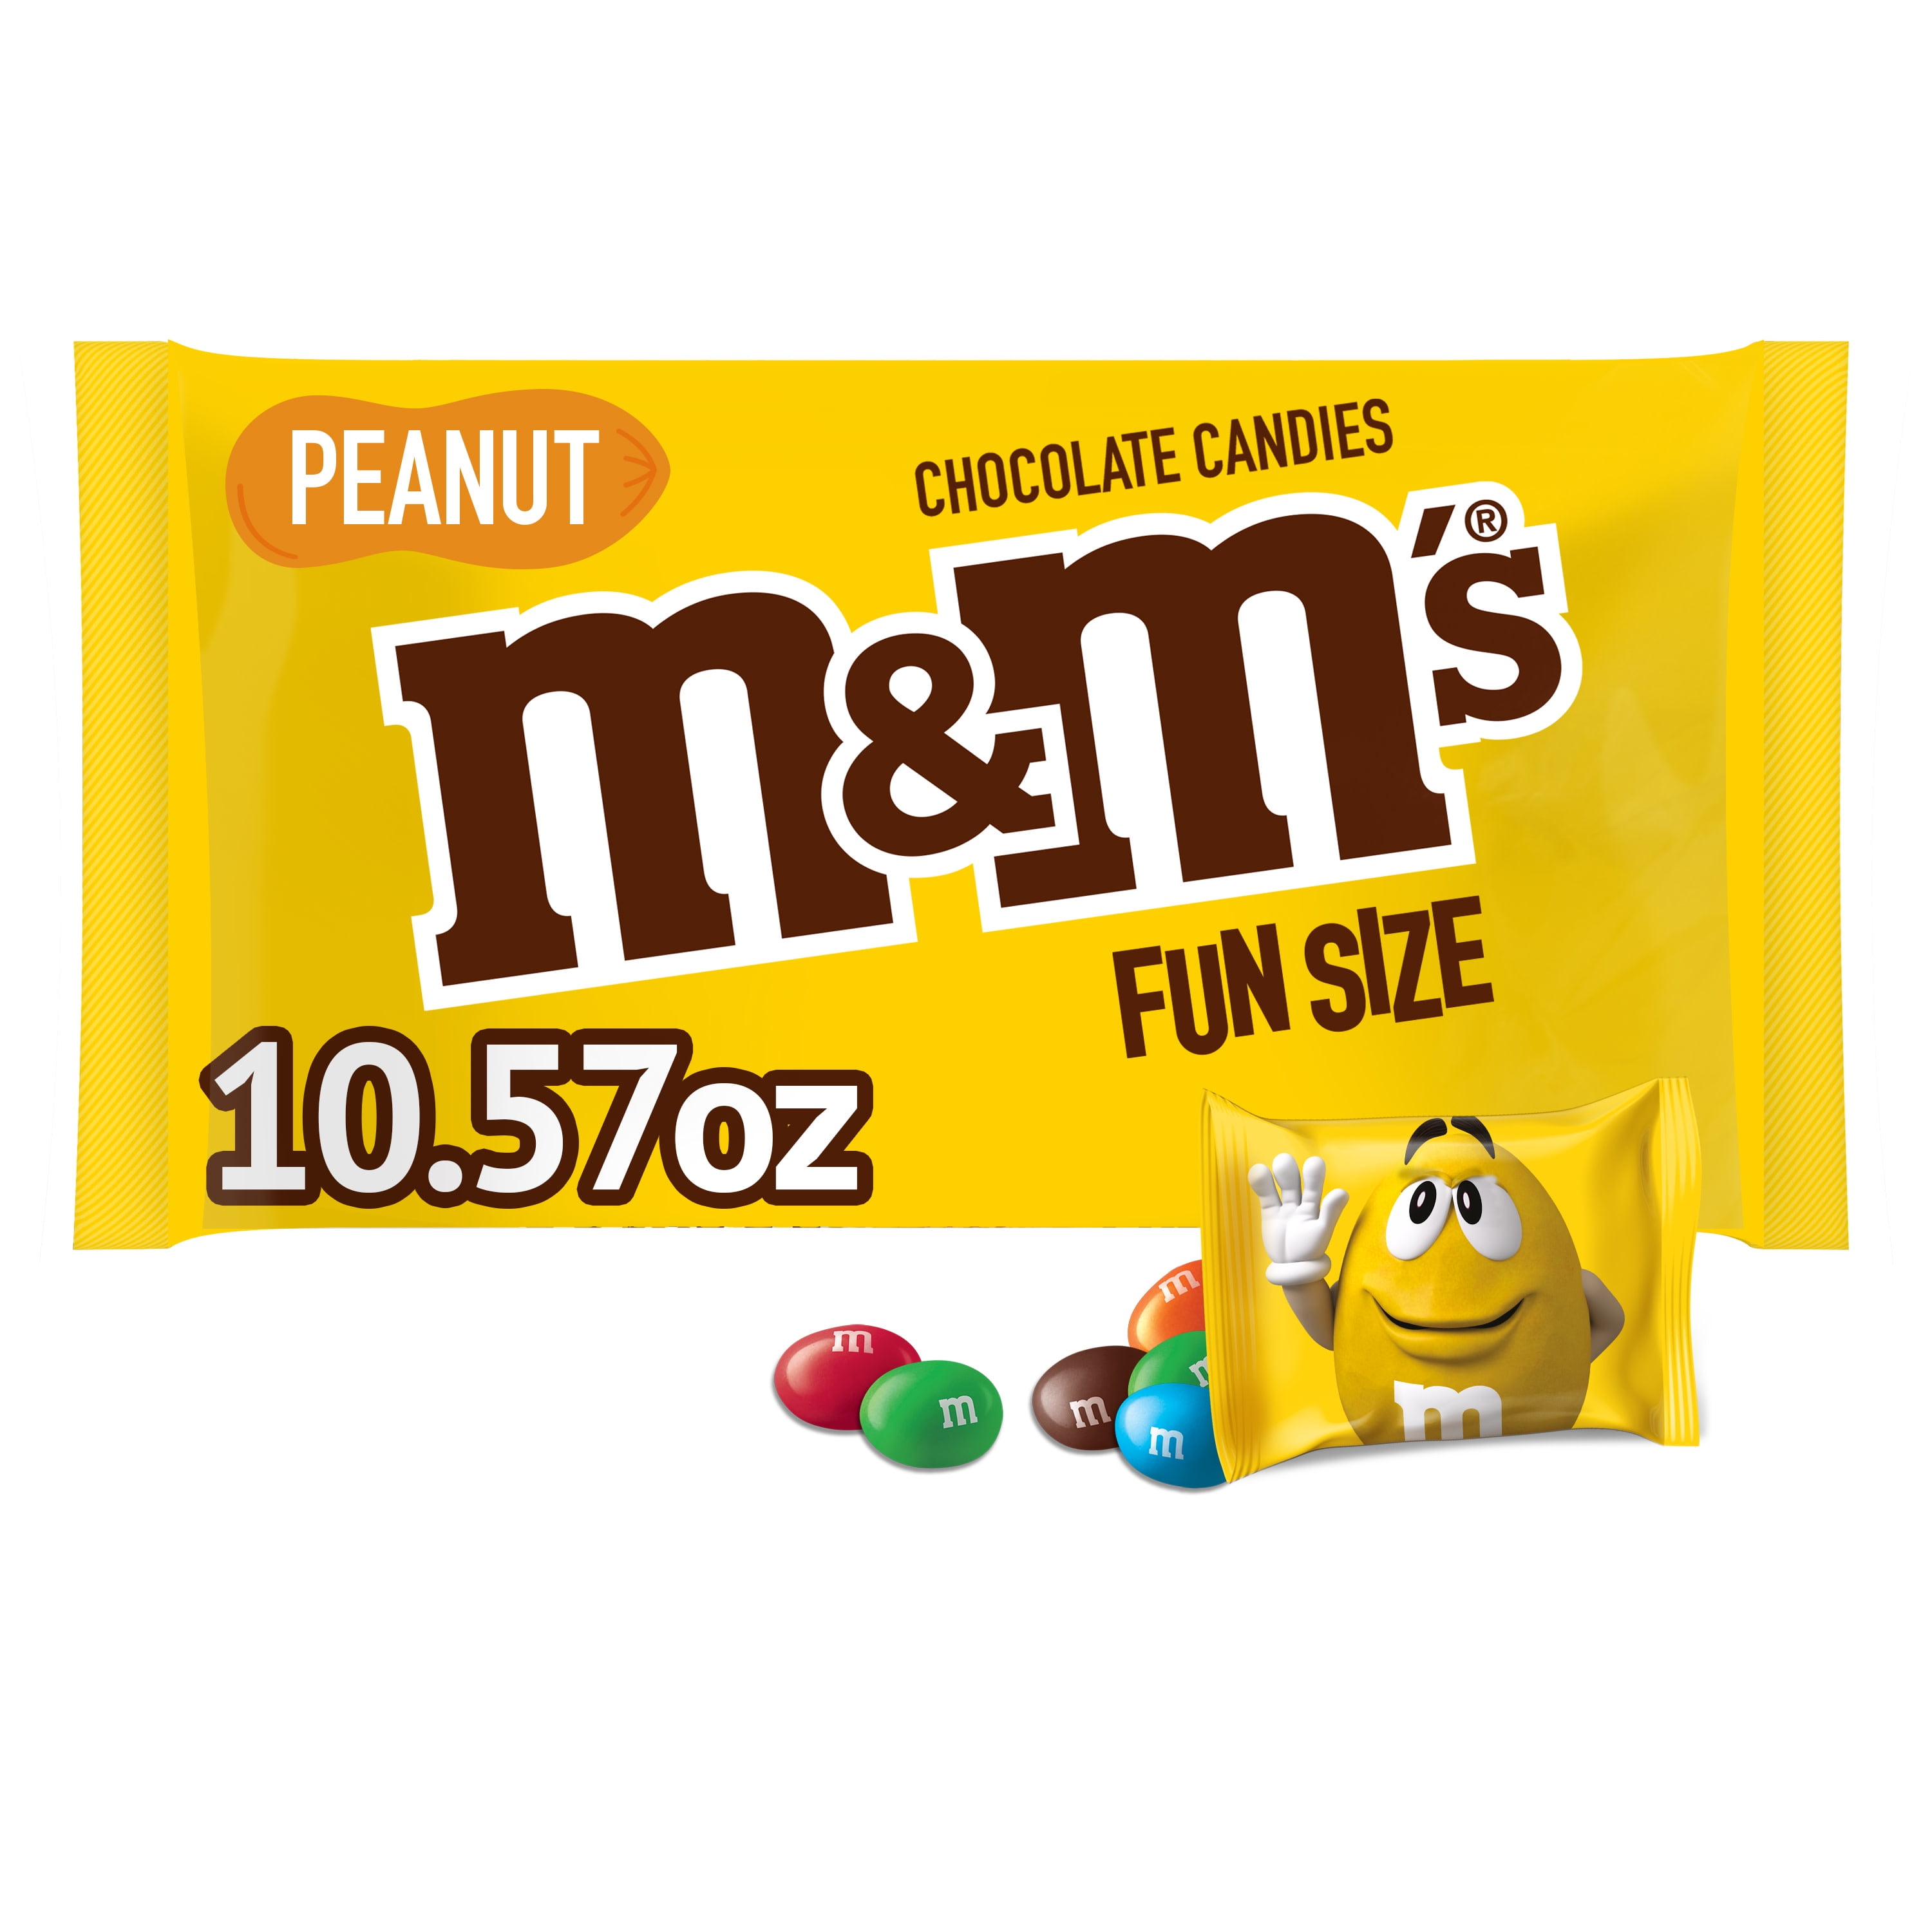  SNICKERS & M&M'S Peanut & Peanut Butter Lovers Fun Size  Chocolate Candy Variety Mix 32.2-Ounce 55-Piece Bag : Grocery & Gourmet Food